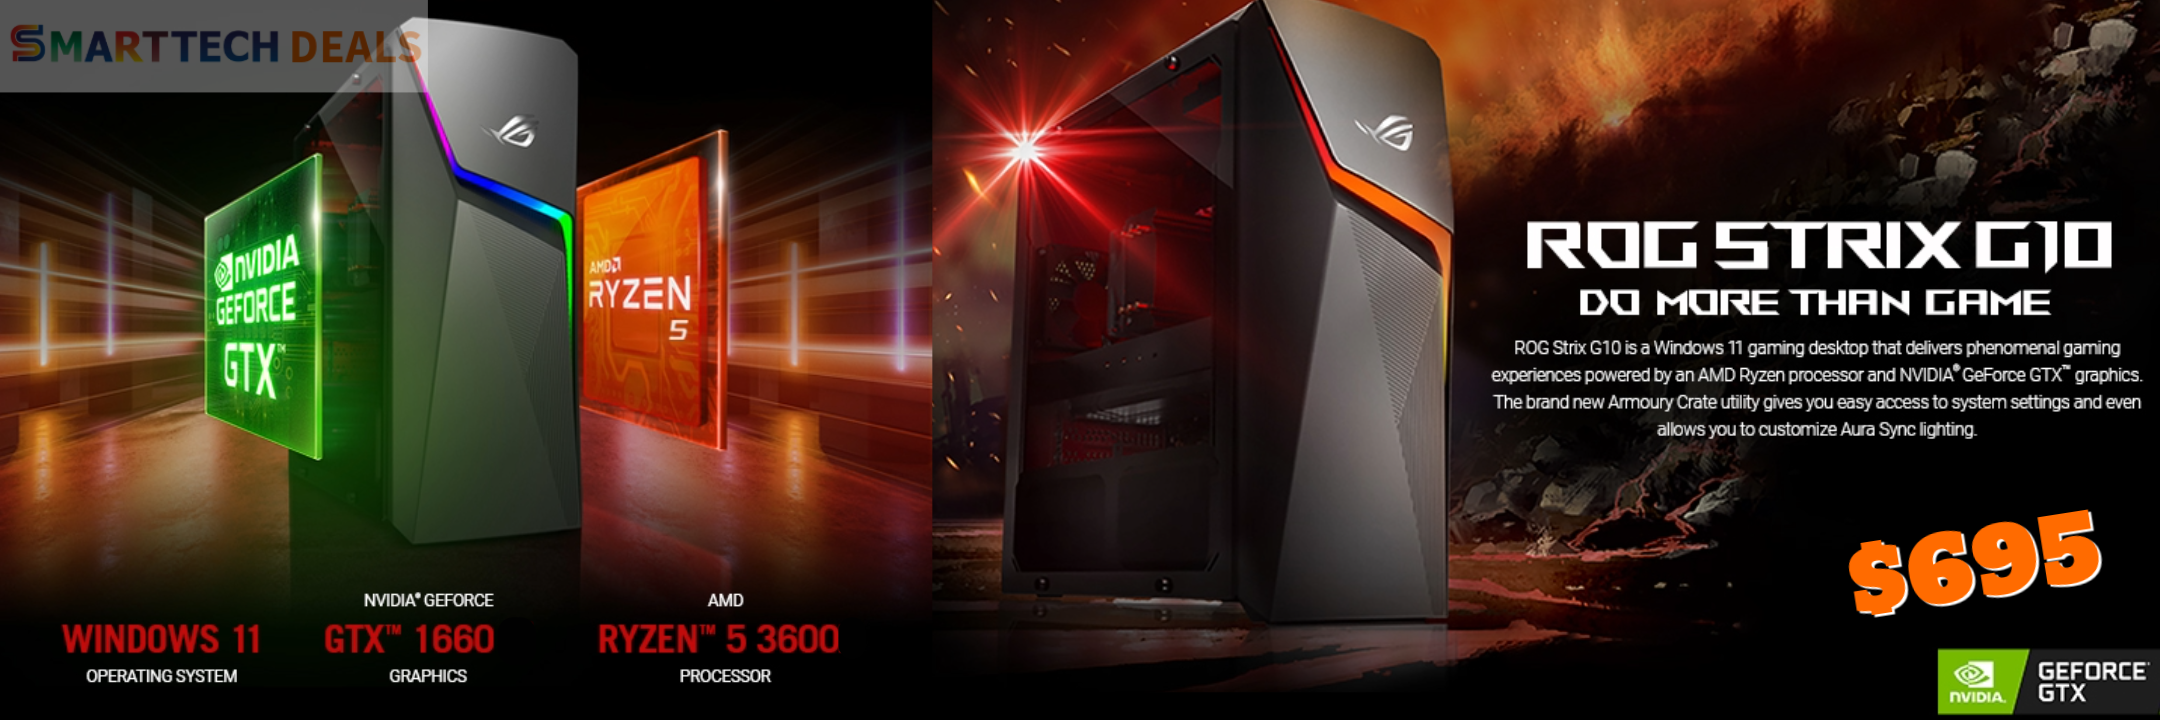 Gaming PC for Sale. Great Deal with awesome specifications